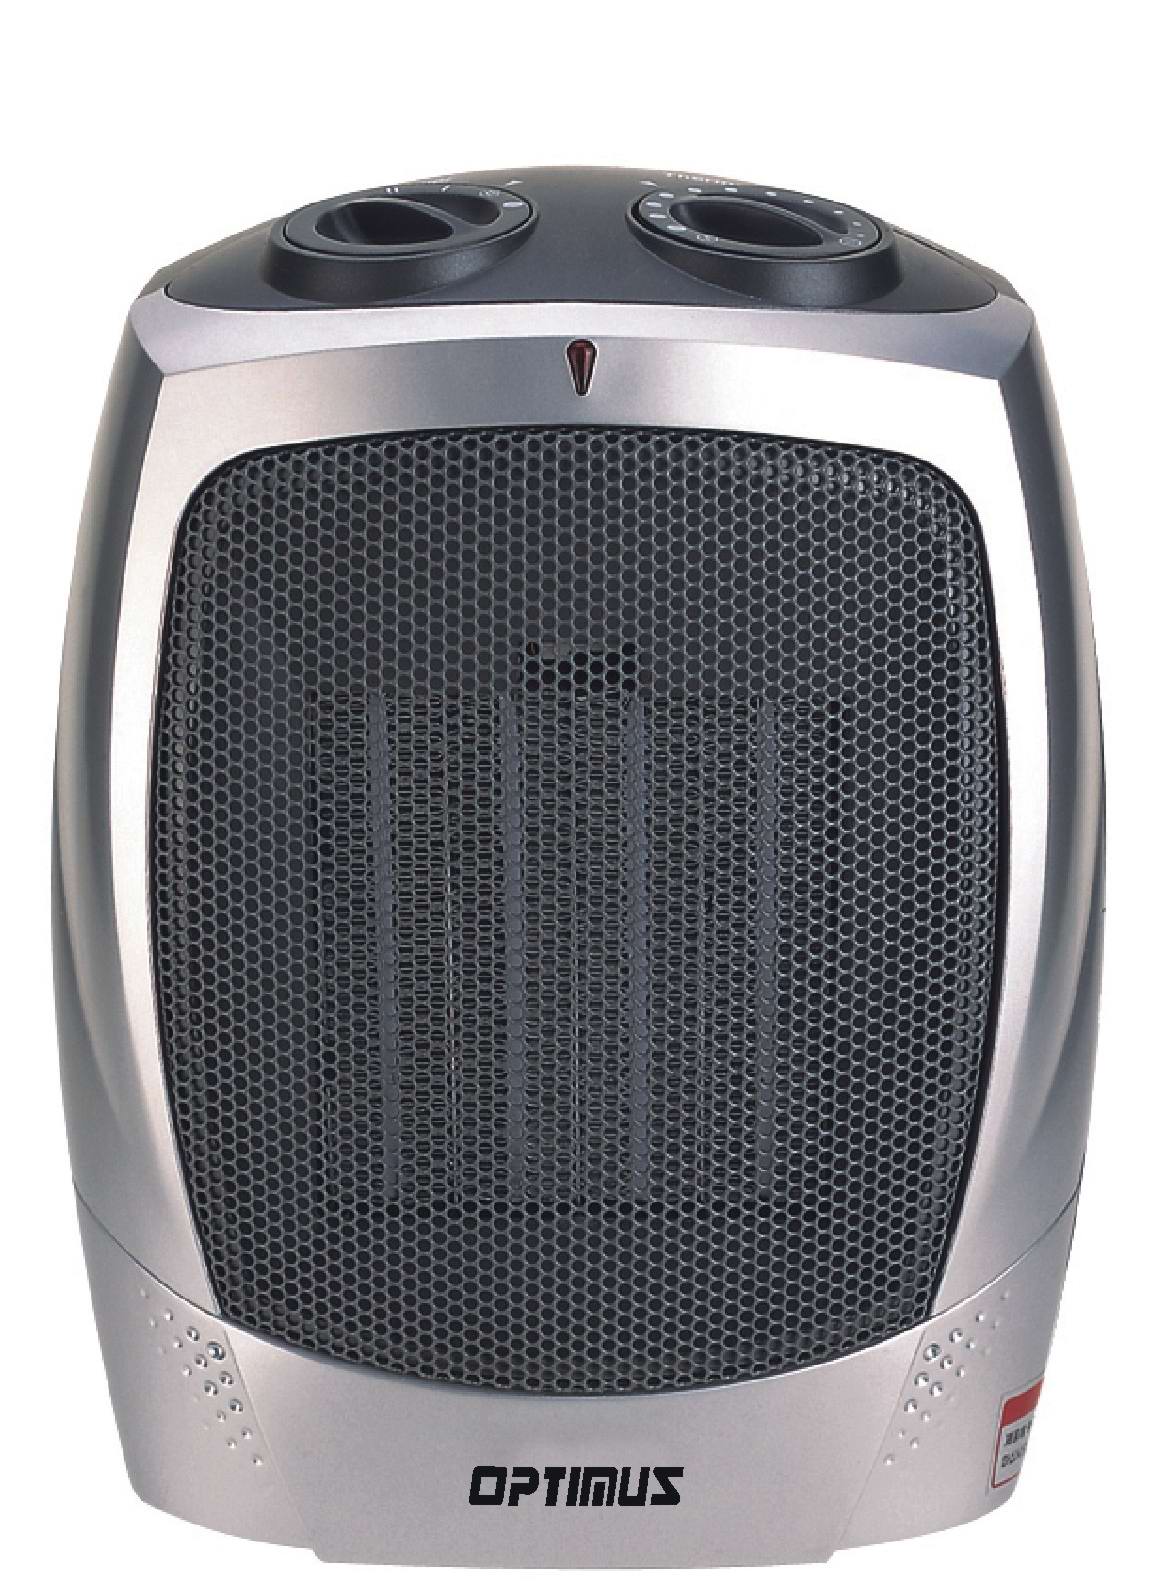 Heater Ceramic With Thermostat Portable